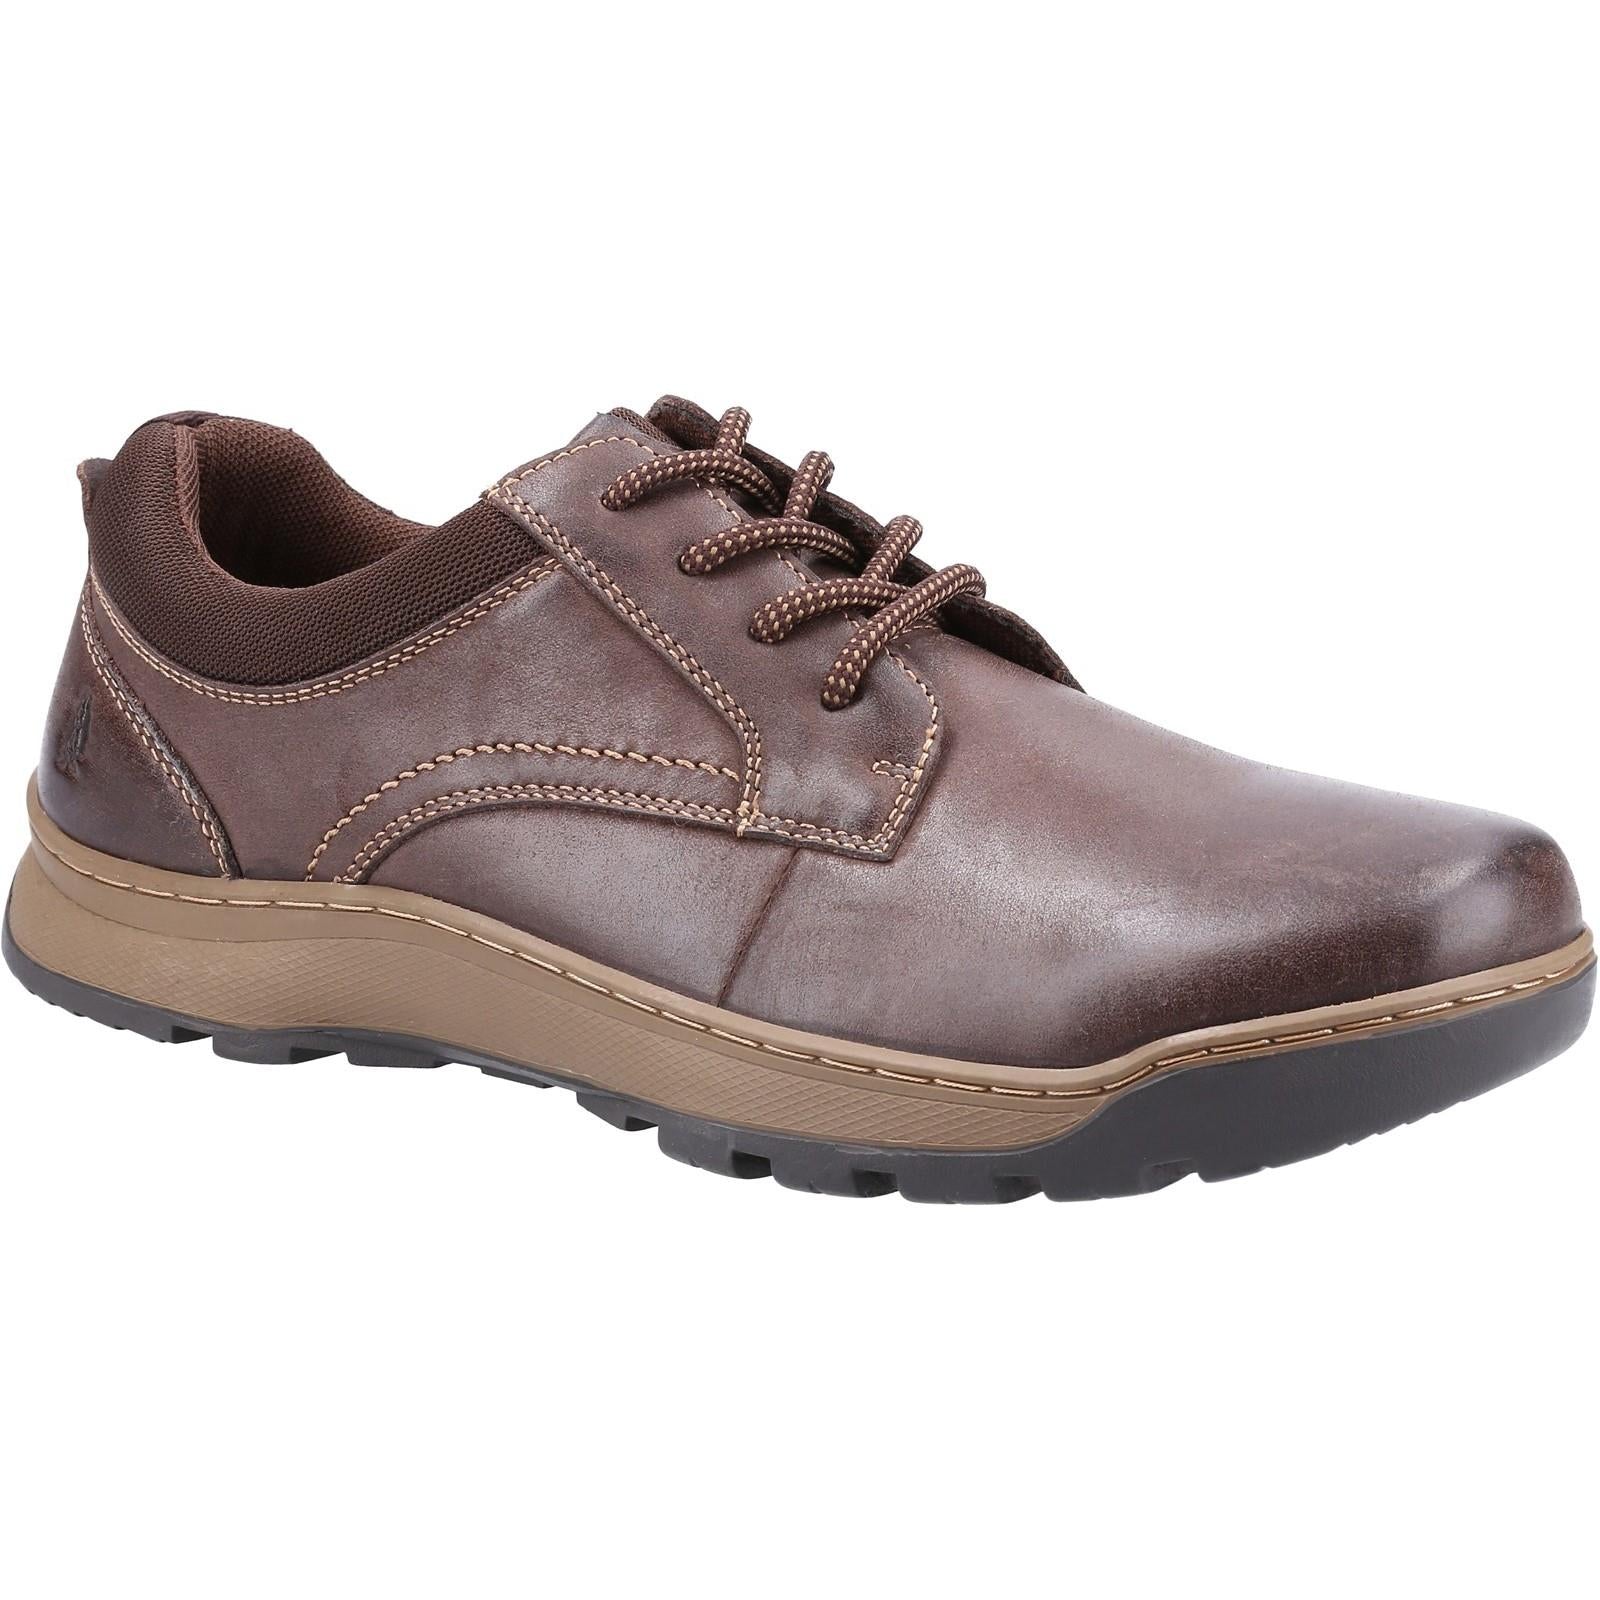 Hush Puppies Olson brown leather memory foam casual lace up shoes